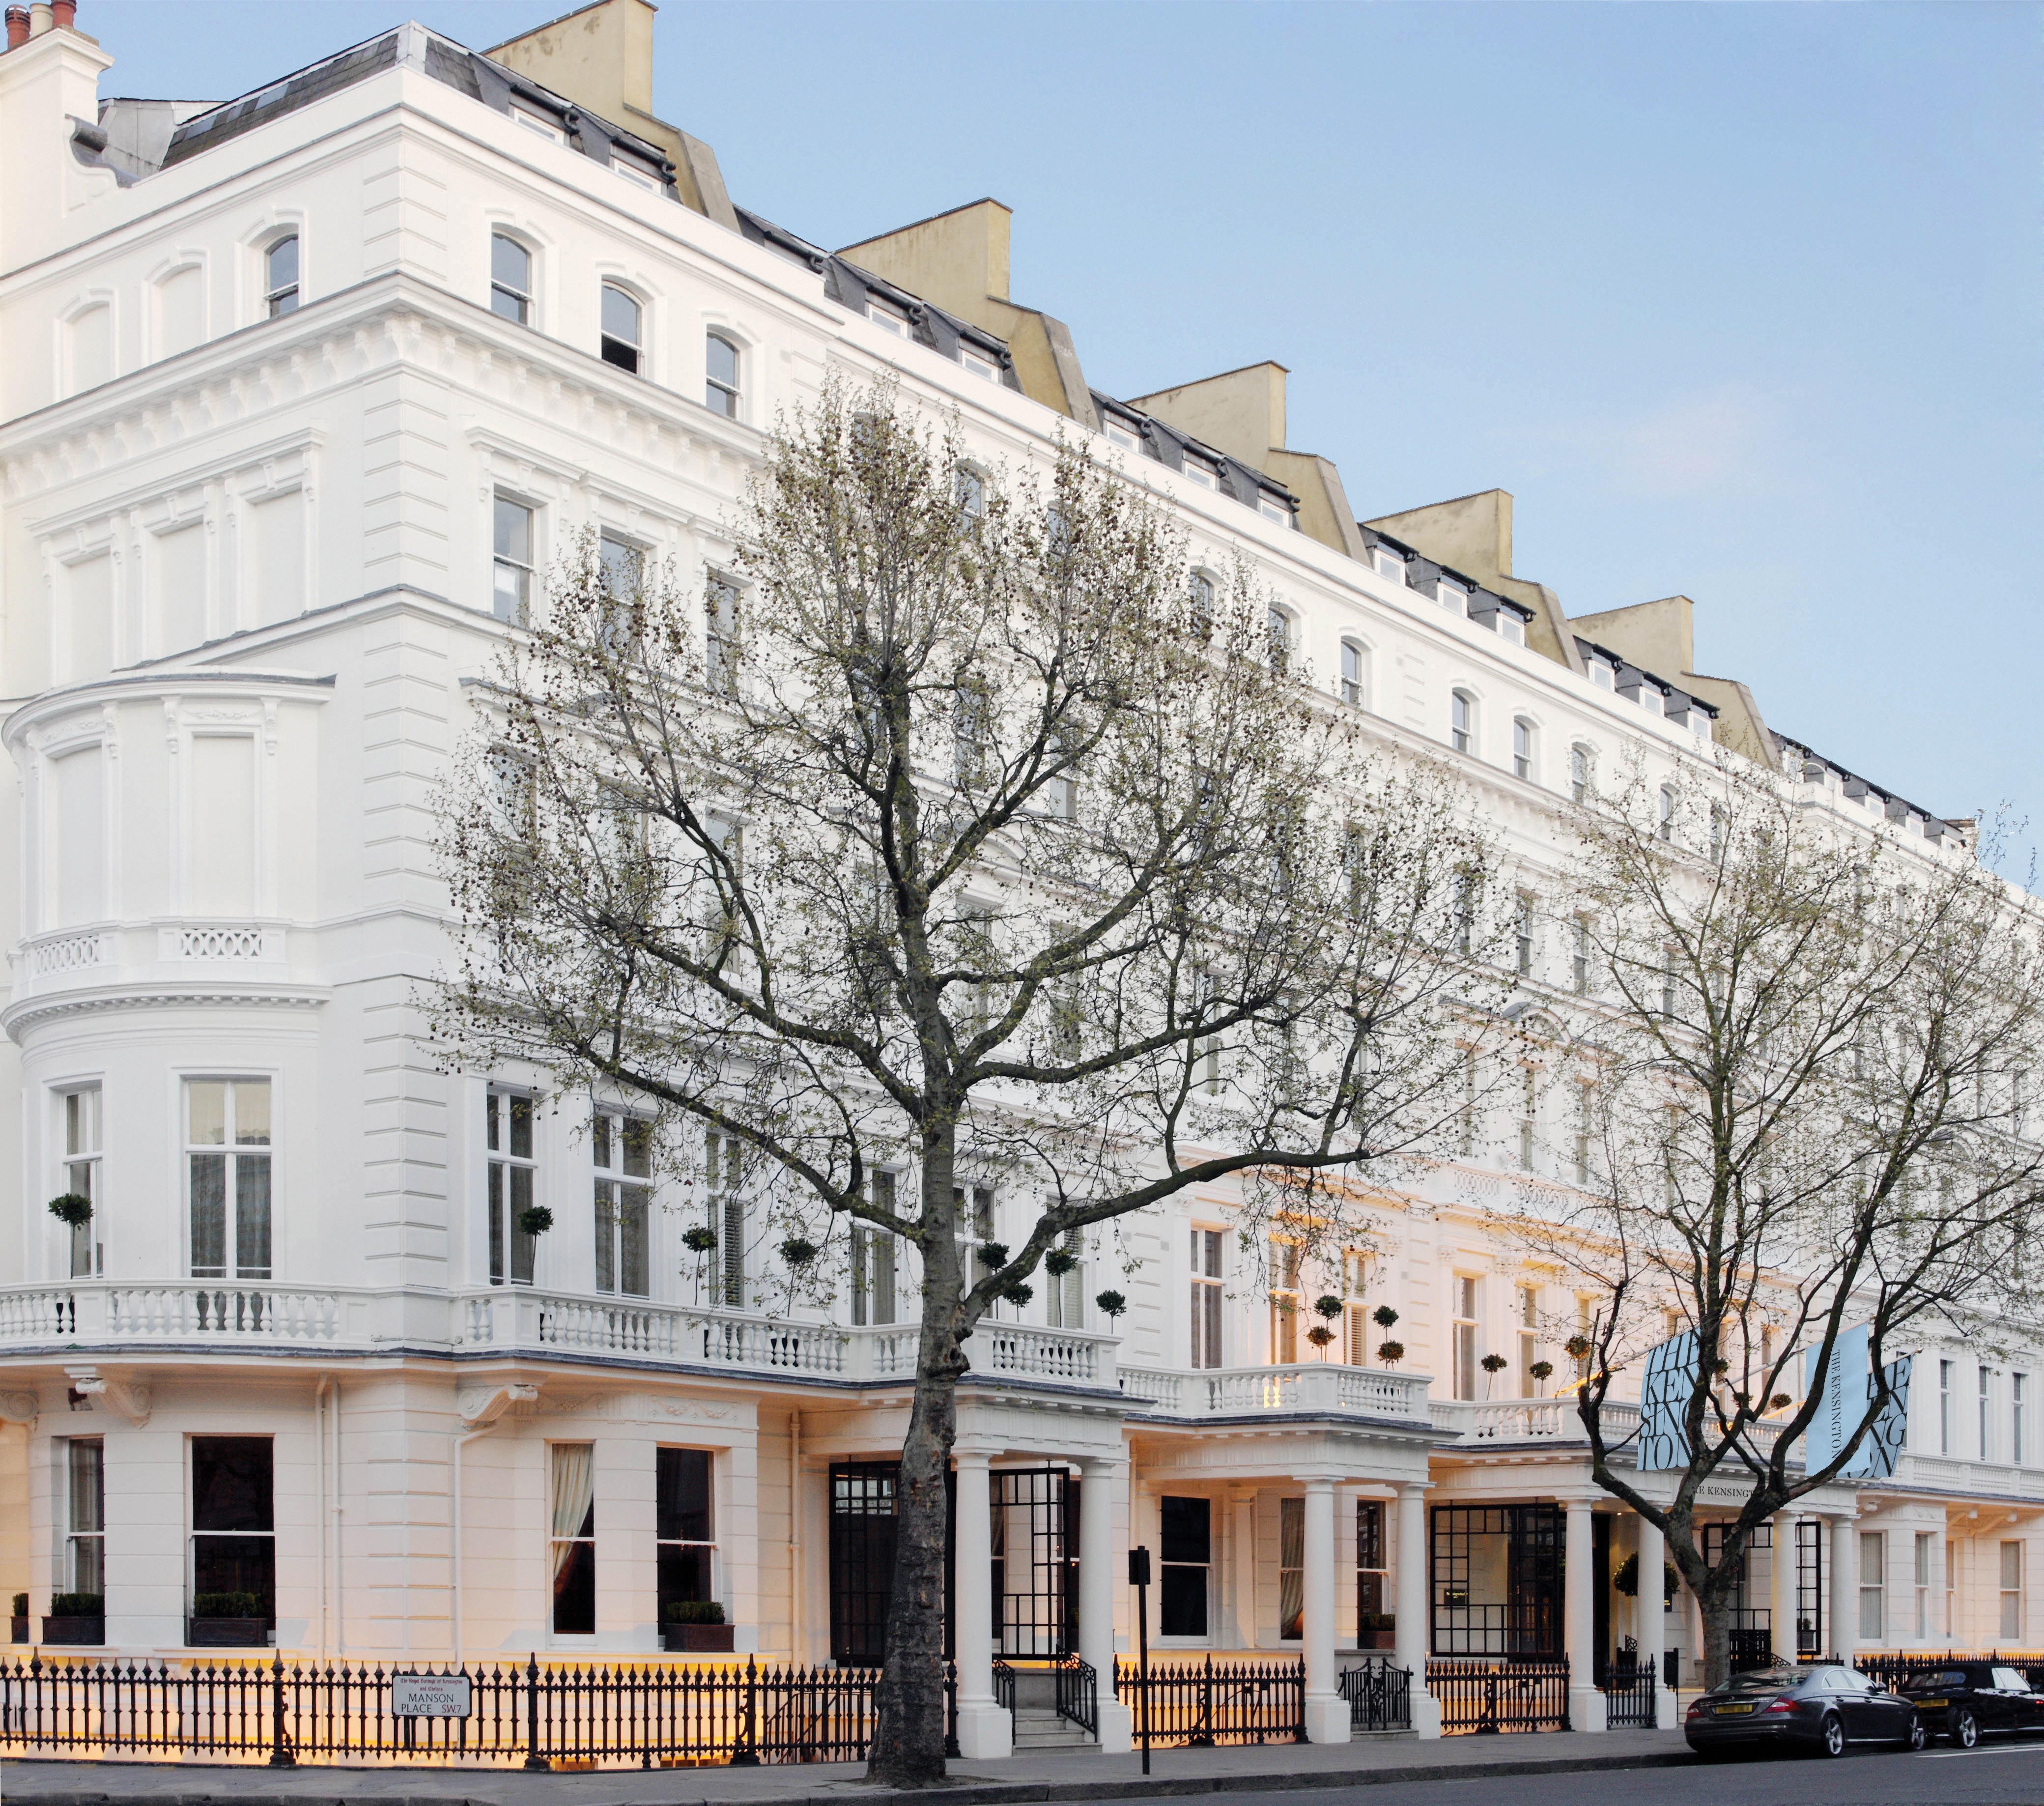 The Kensington Hotel in London is offering a three-night suite package which includes two tickets to the Dior exhibition at the Victoria & Albert Museum.